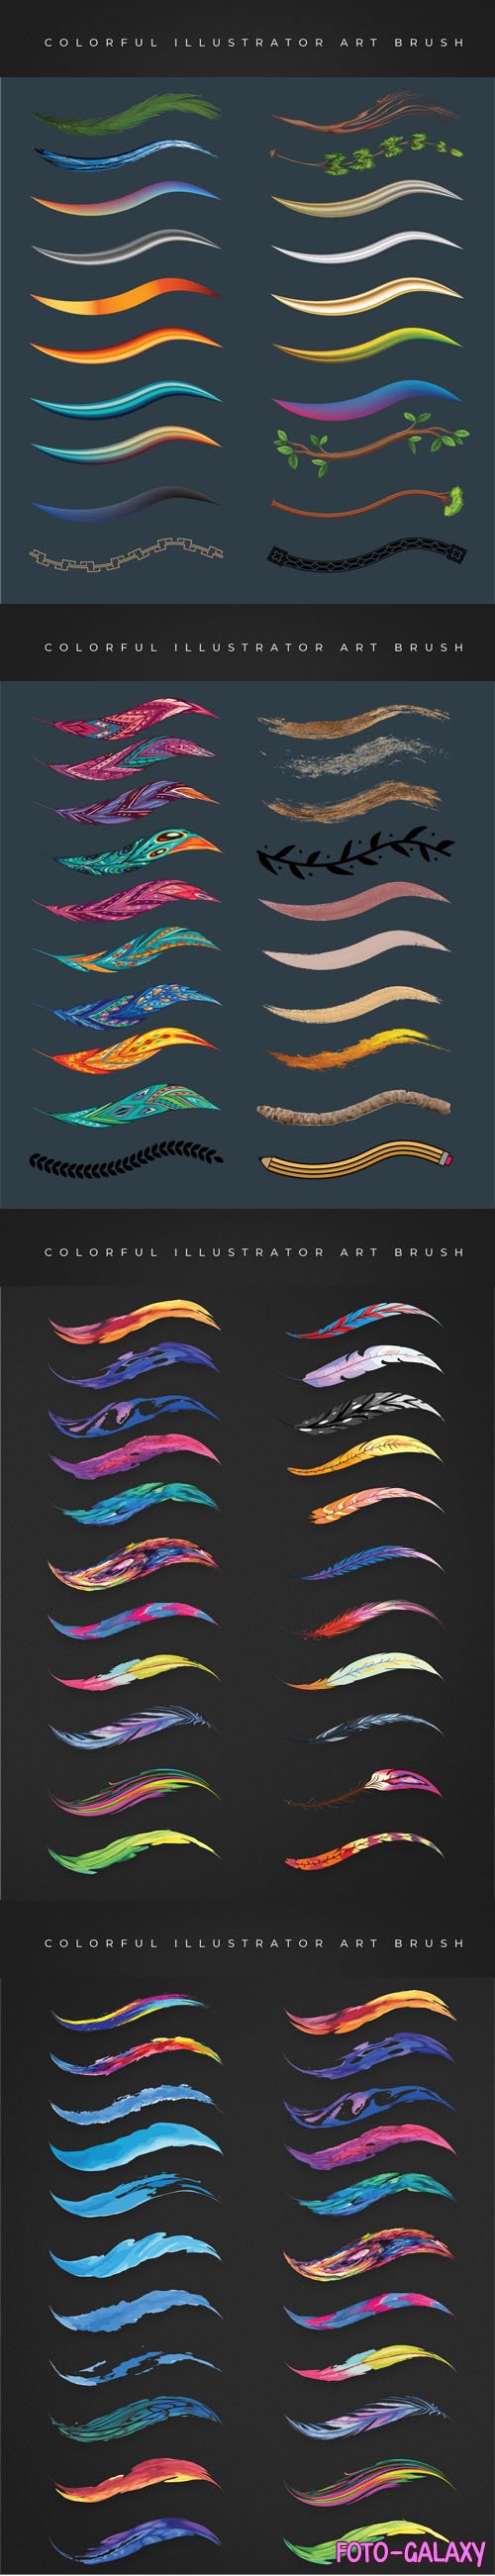 70+ Colorful Illustrator Art Brushes Collection